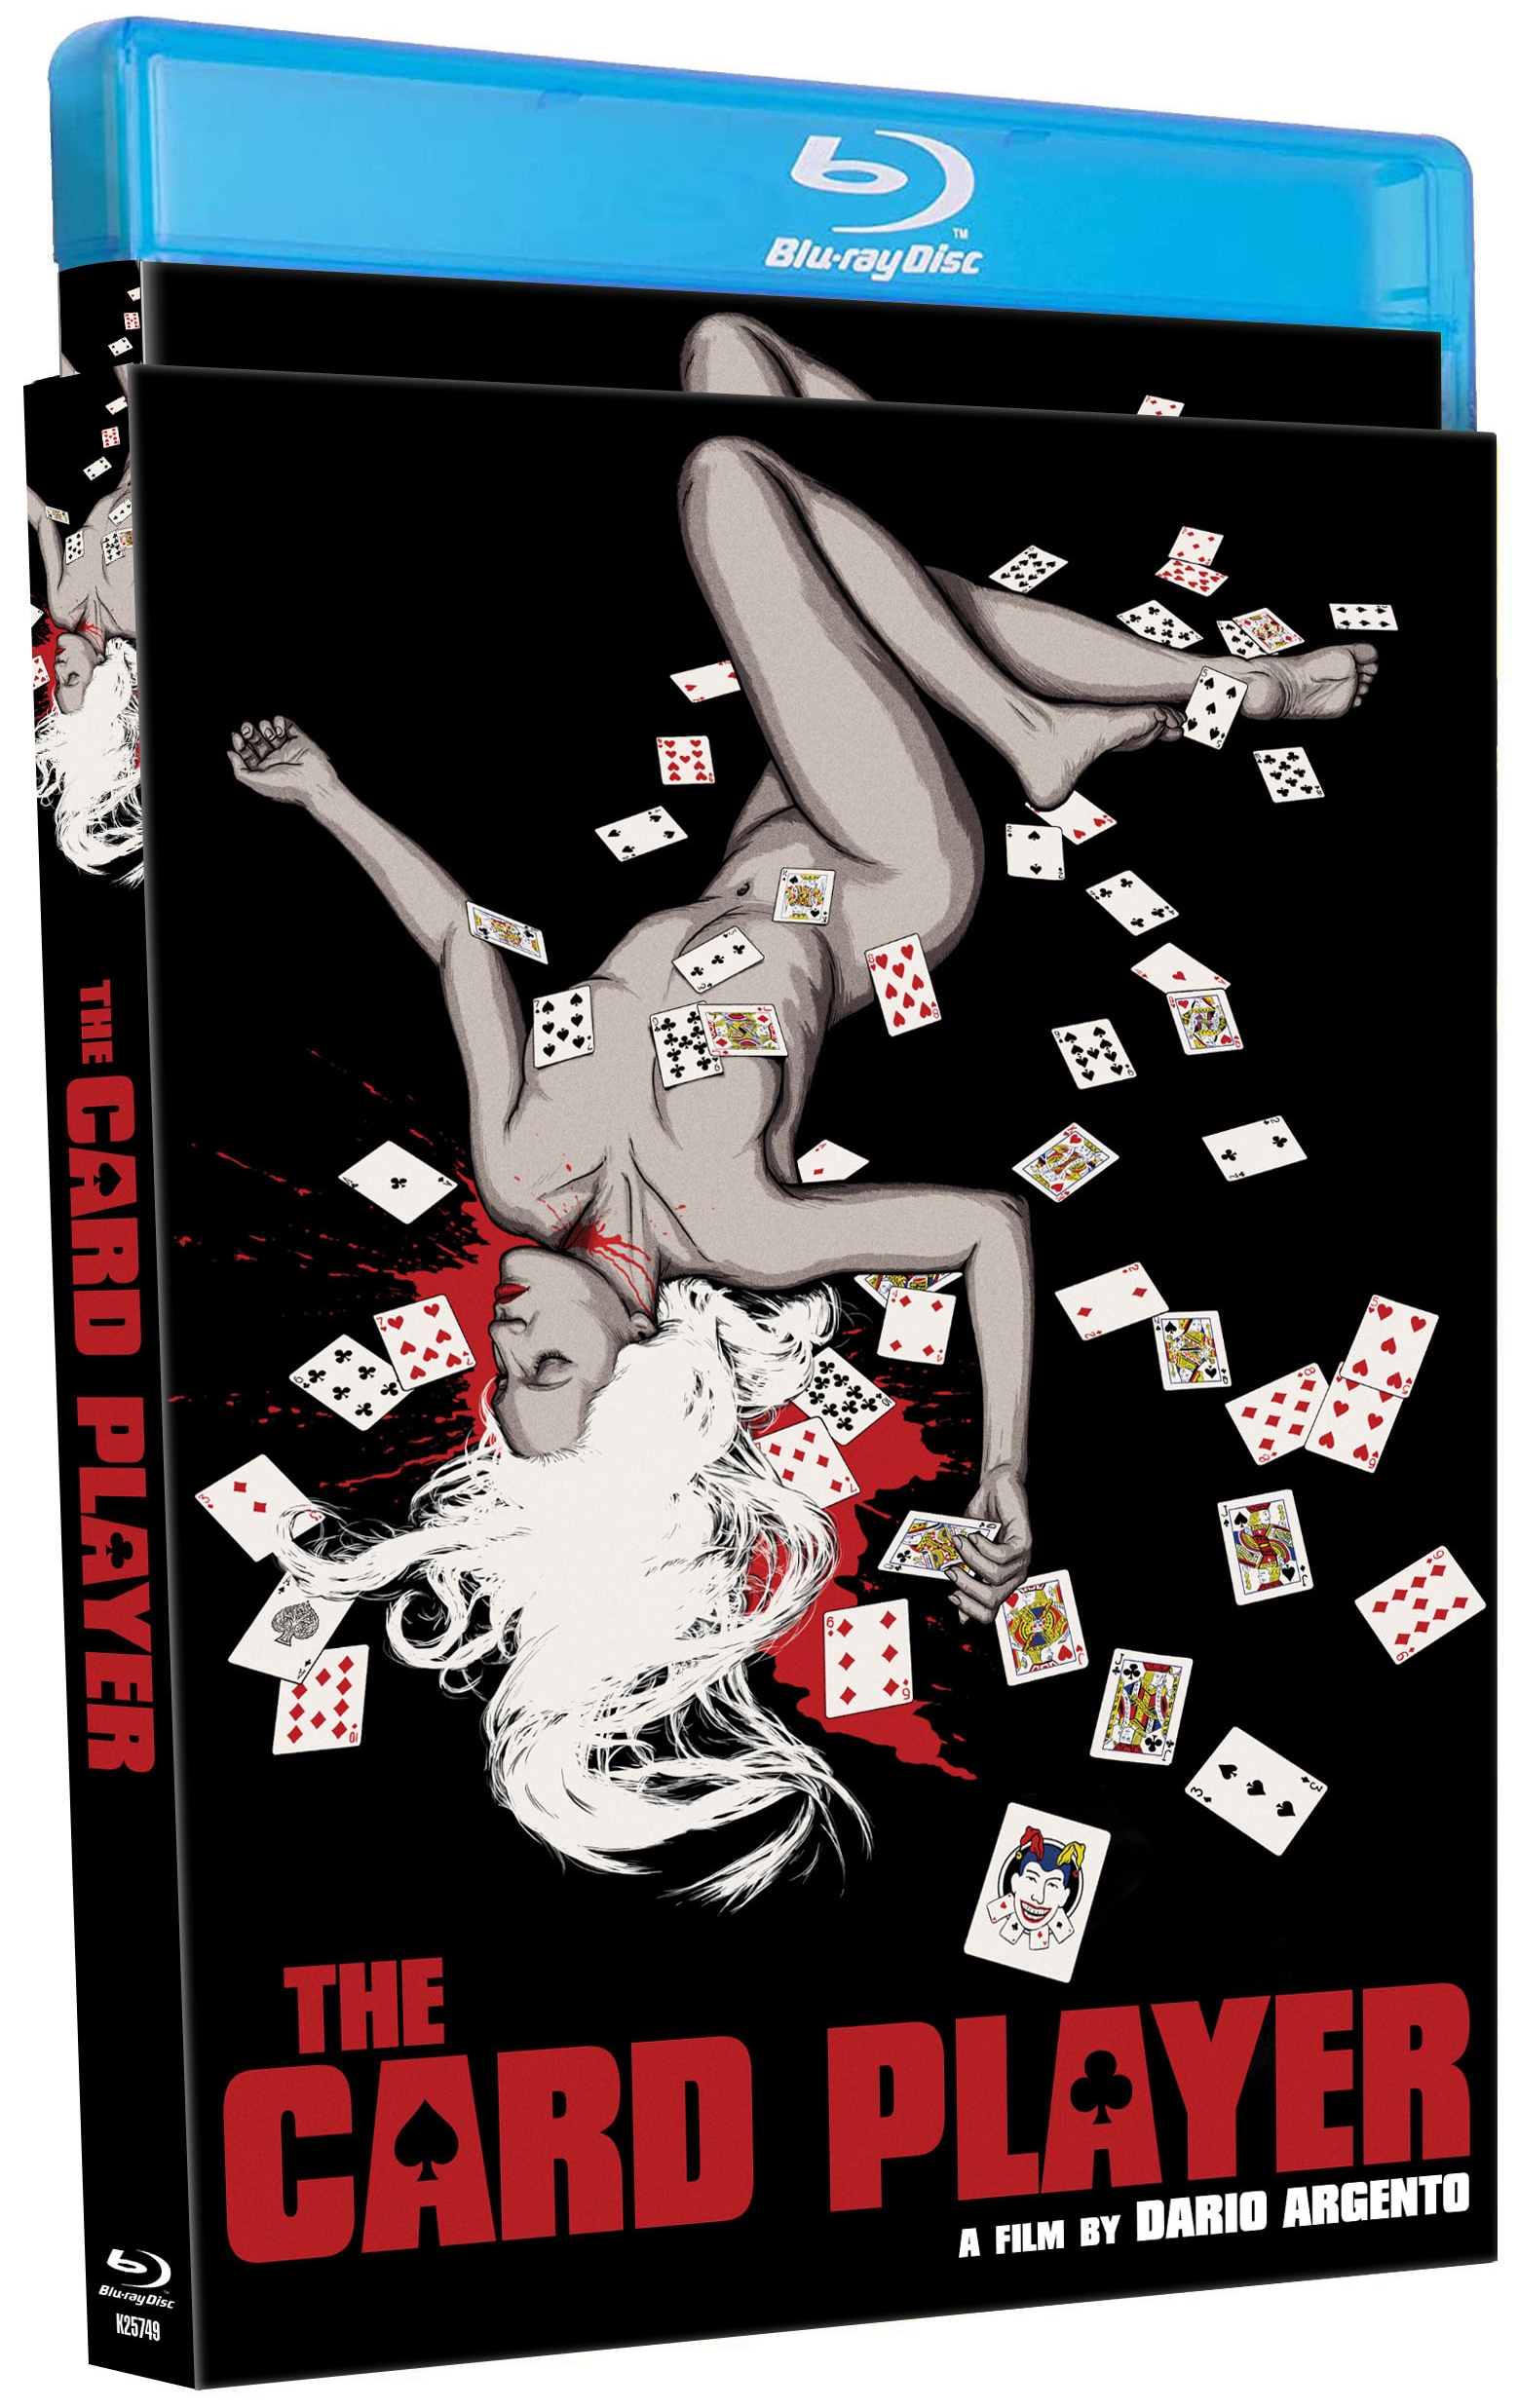 The Card Player [Blu-ray] [2004]